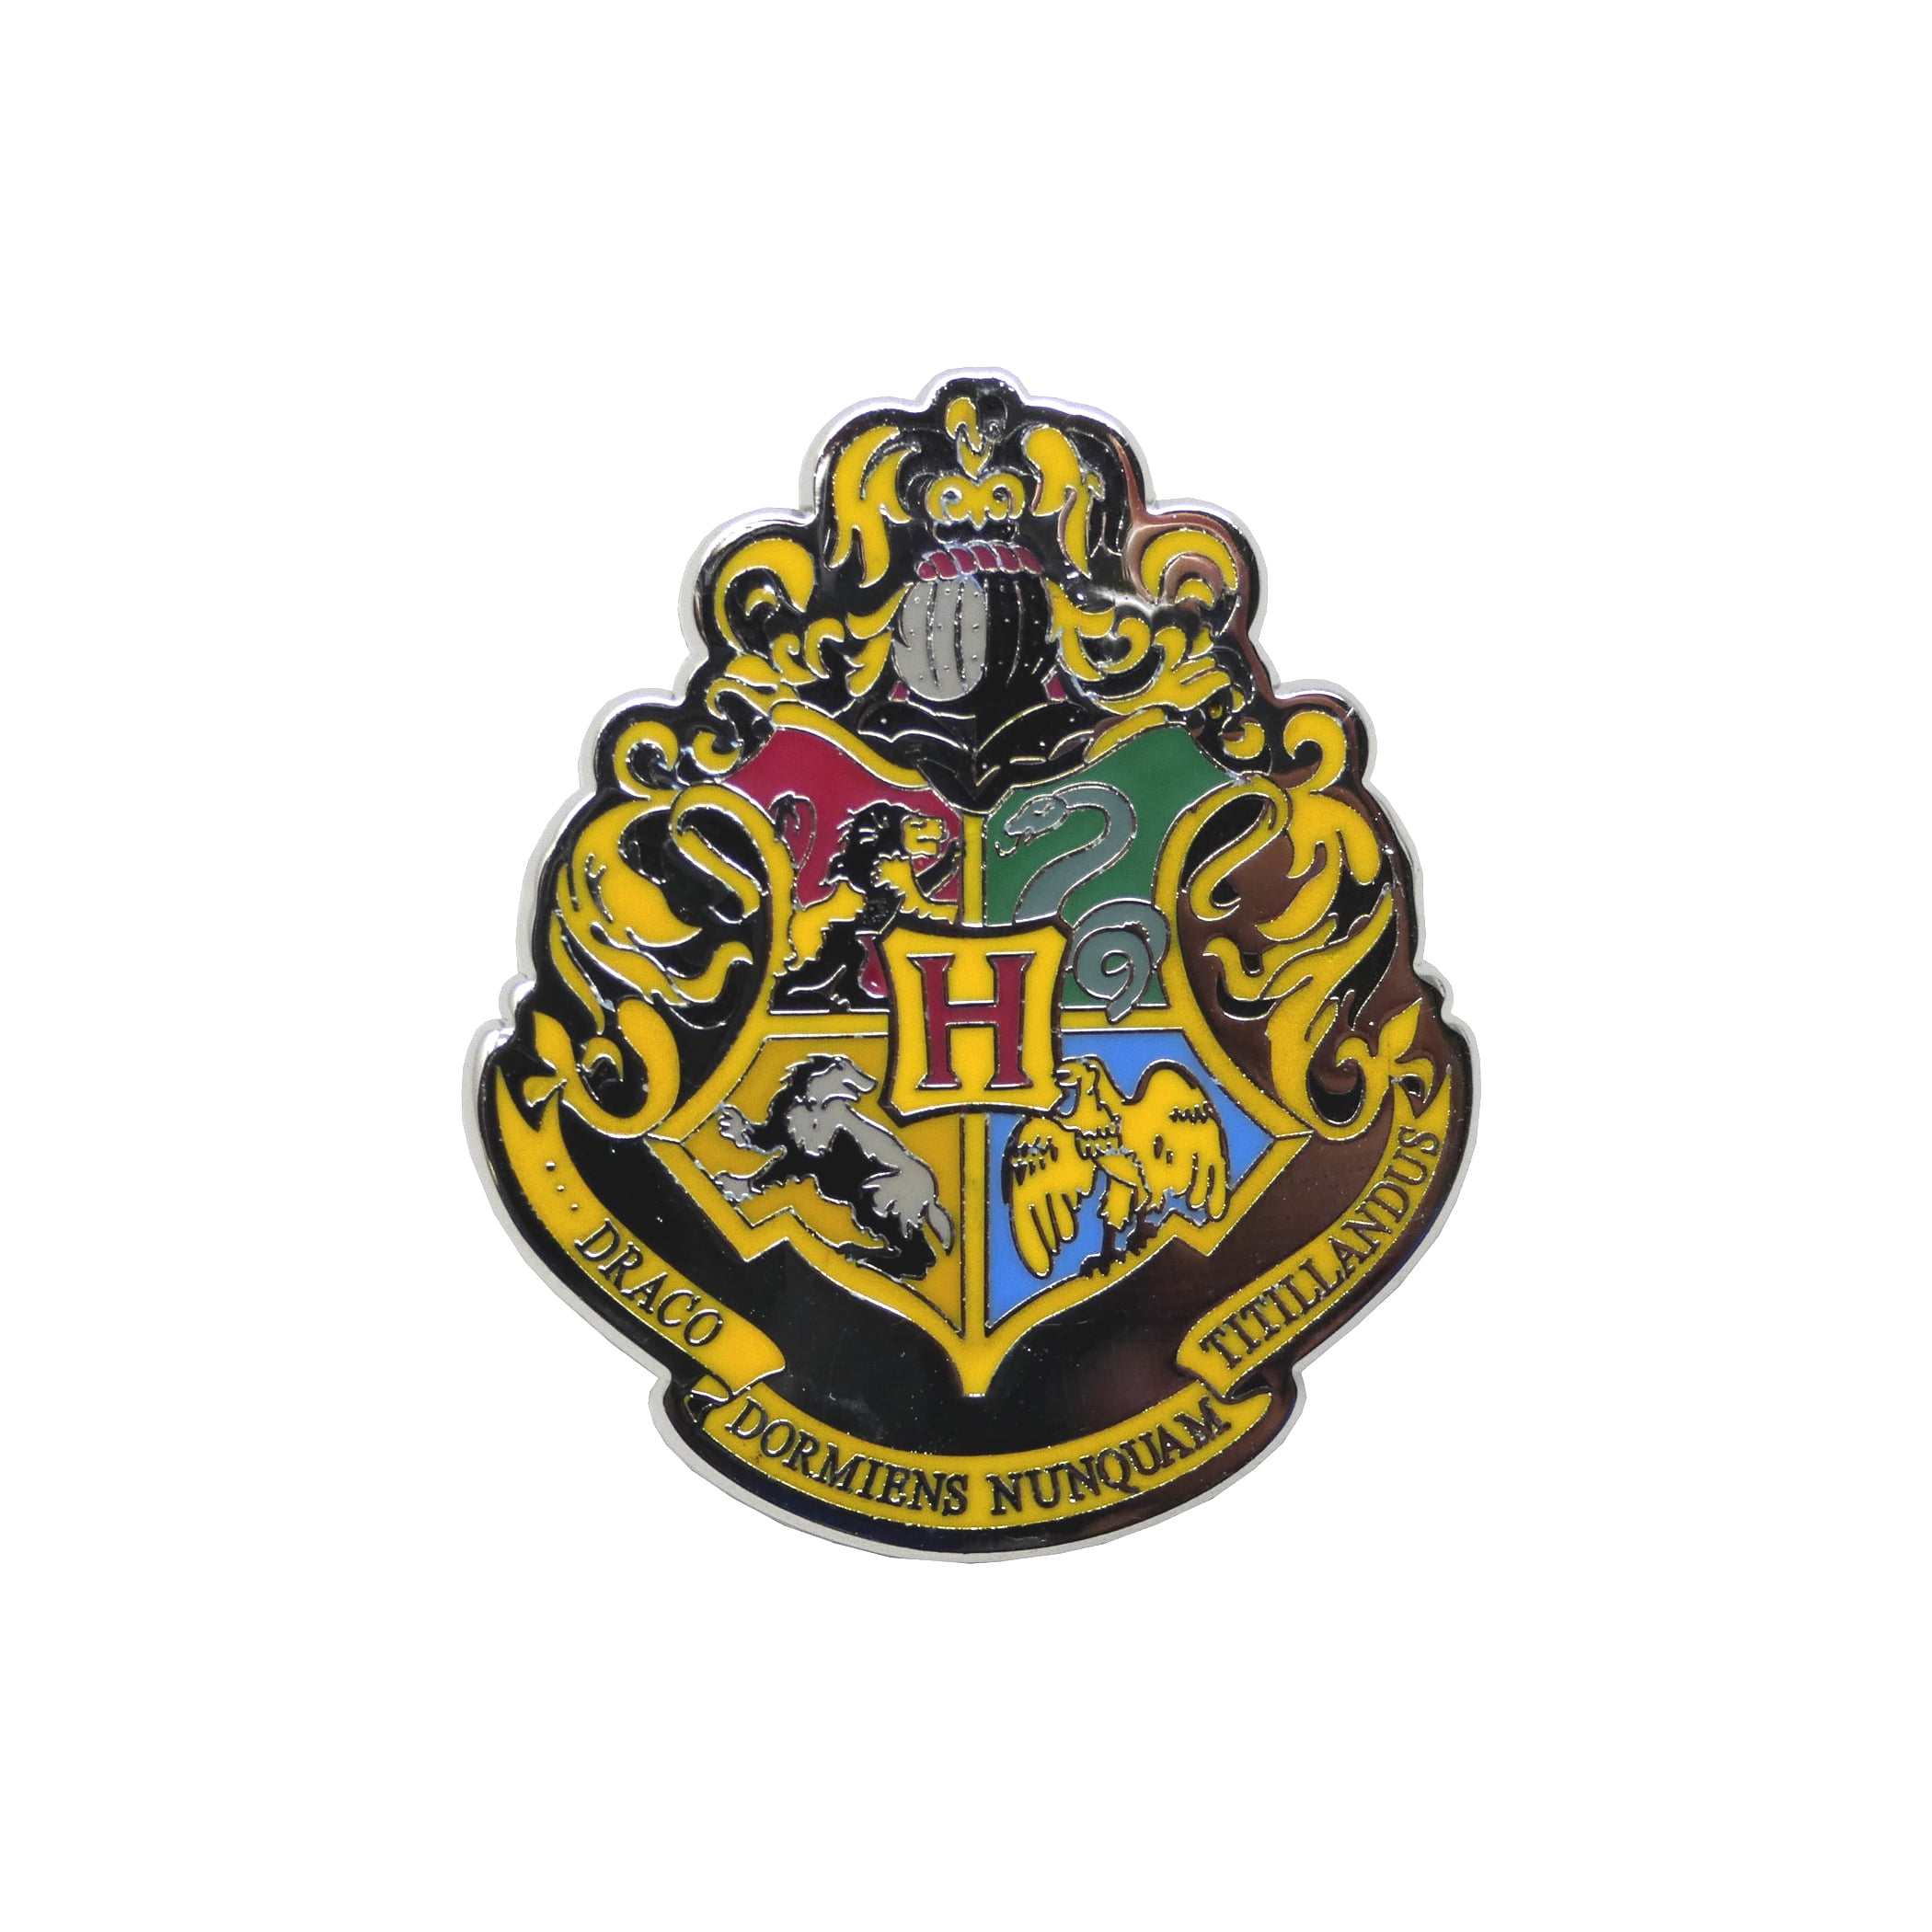 Harry potter hogwarts express pin badge made by arthur price